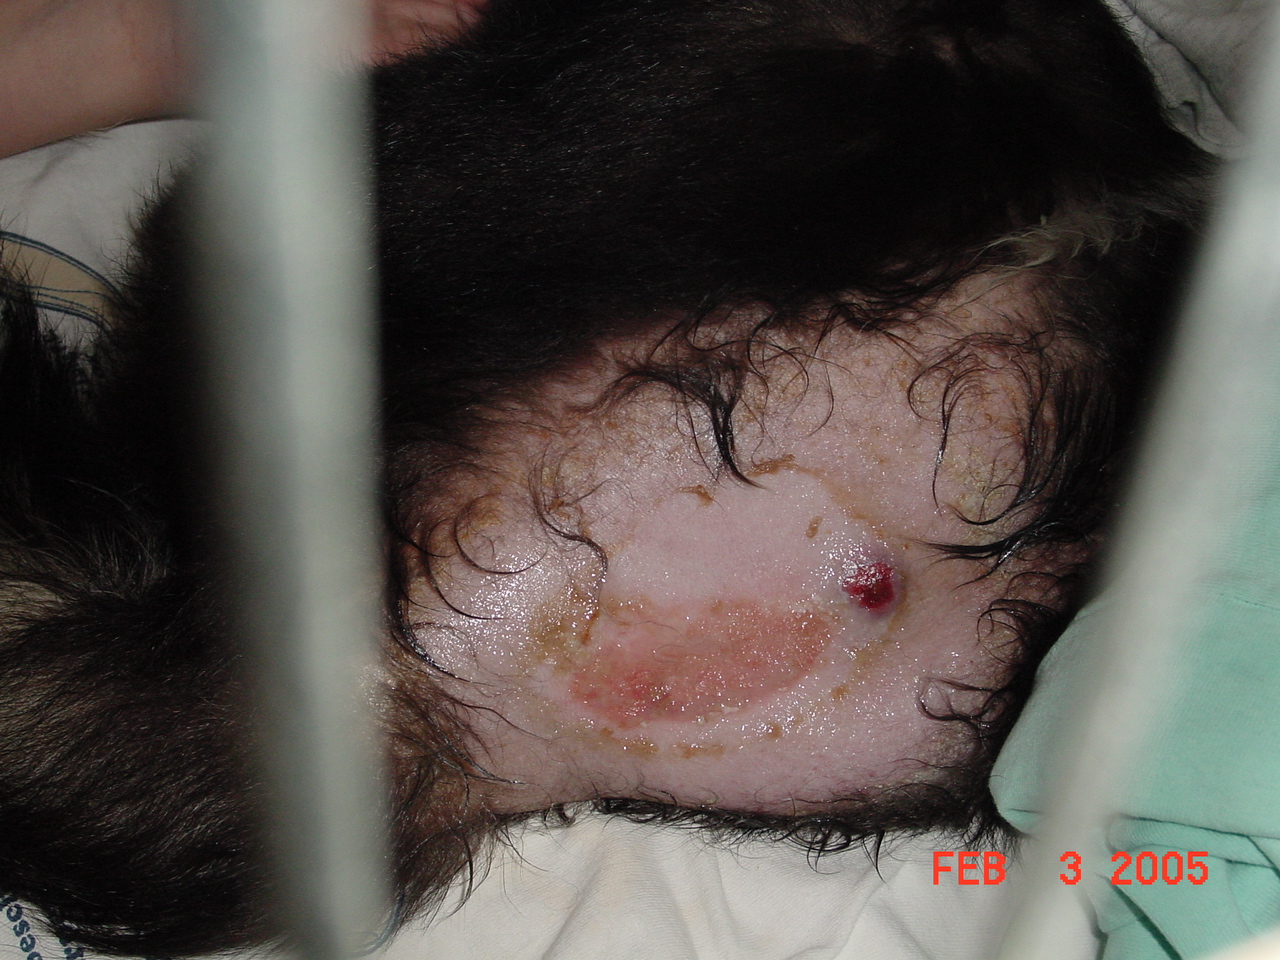 Severe abrasion, hair loss, and open wound from staph infection